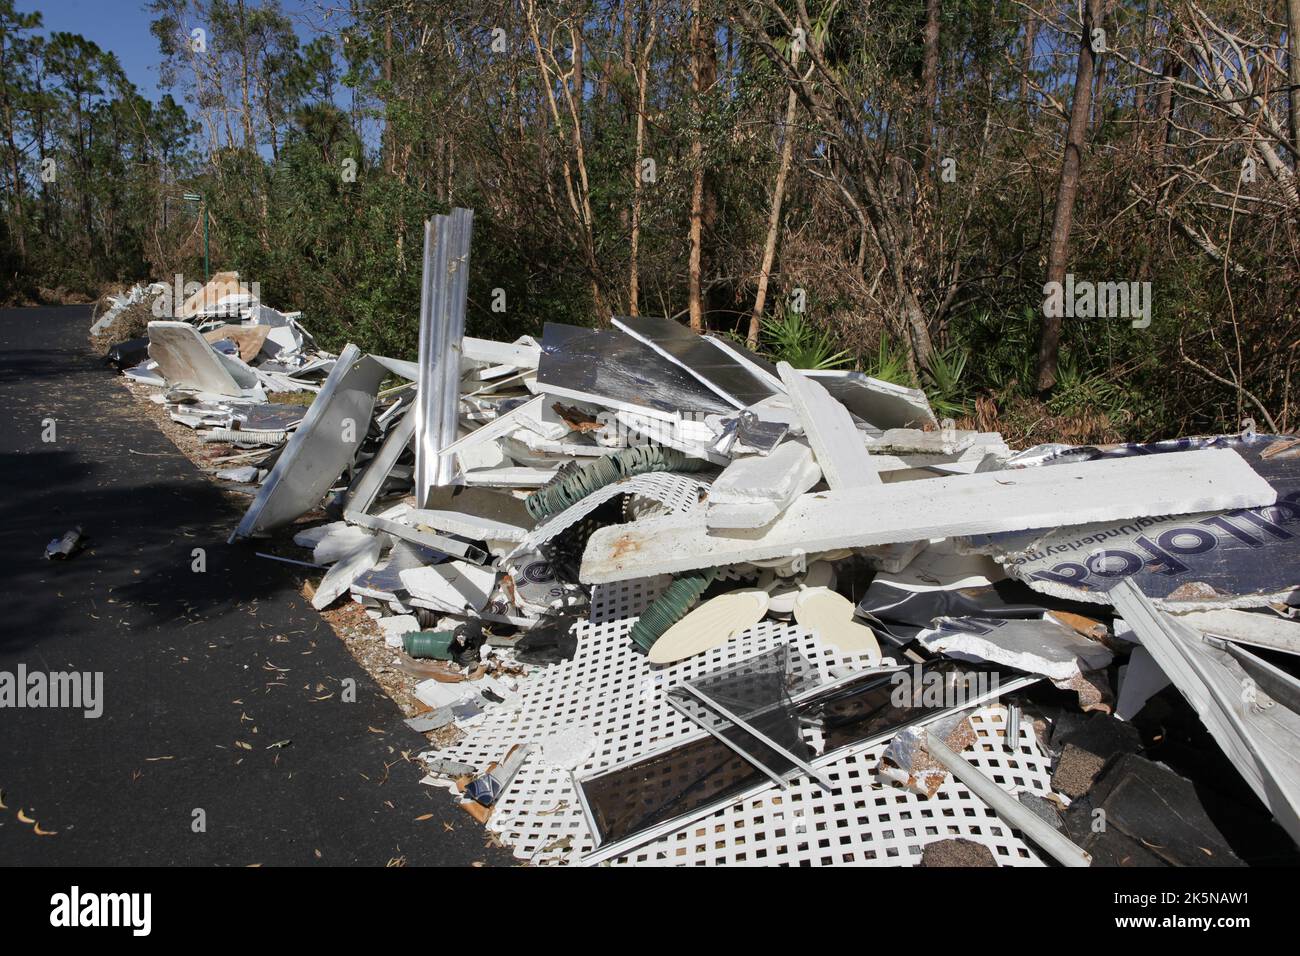 Debris from homes destroyed by Hurricane Ian lays along side of road awaiting pick up in North Fort Myers, Florida, Oct 8, 2022, © Katharine Andriotis Stock Photo